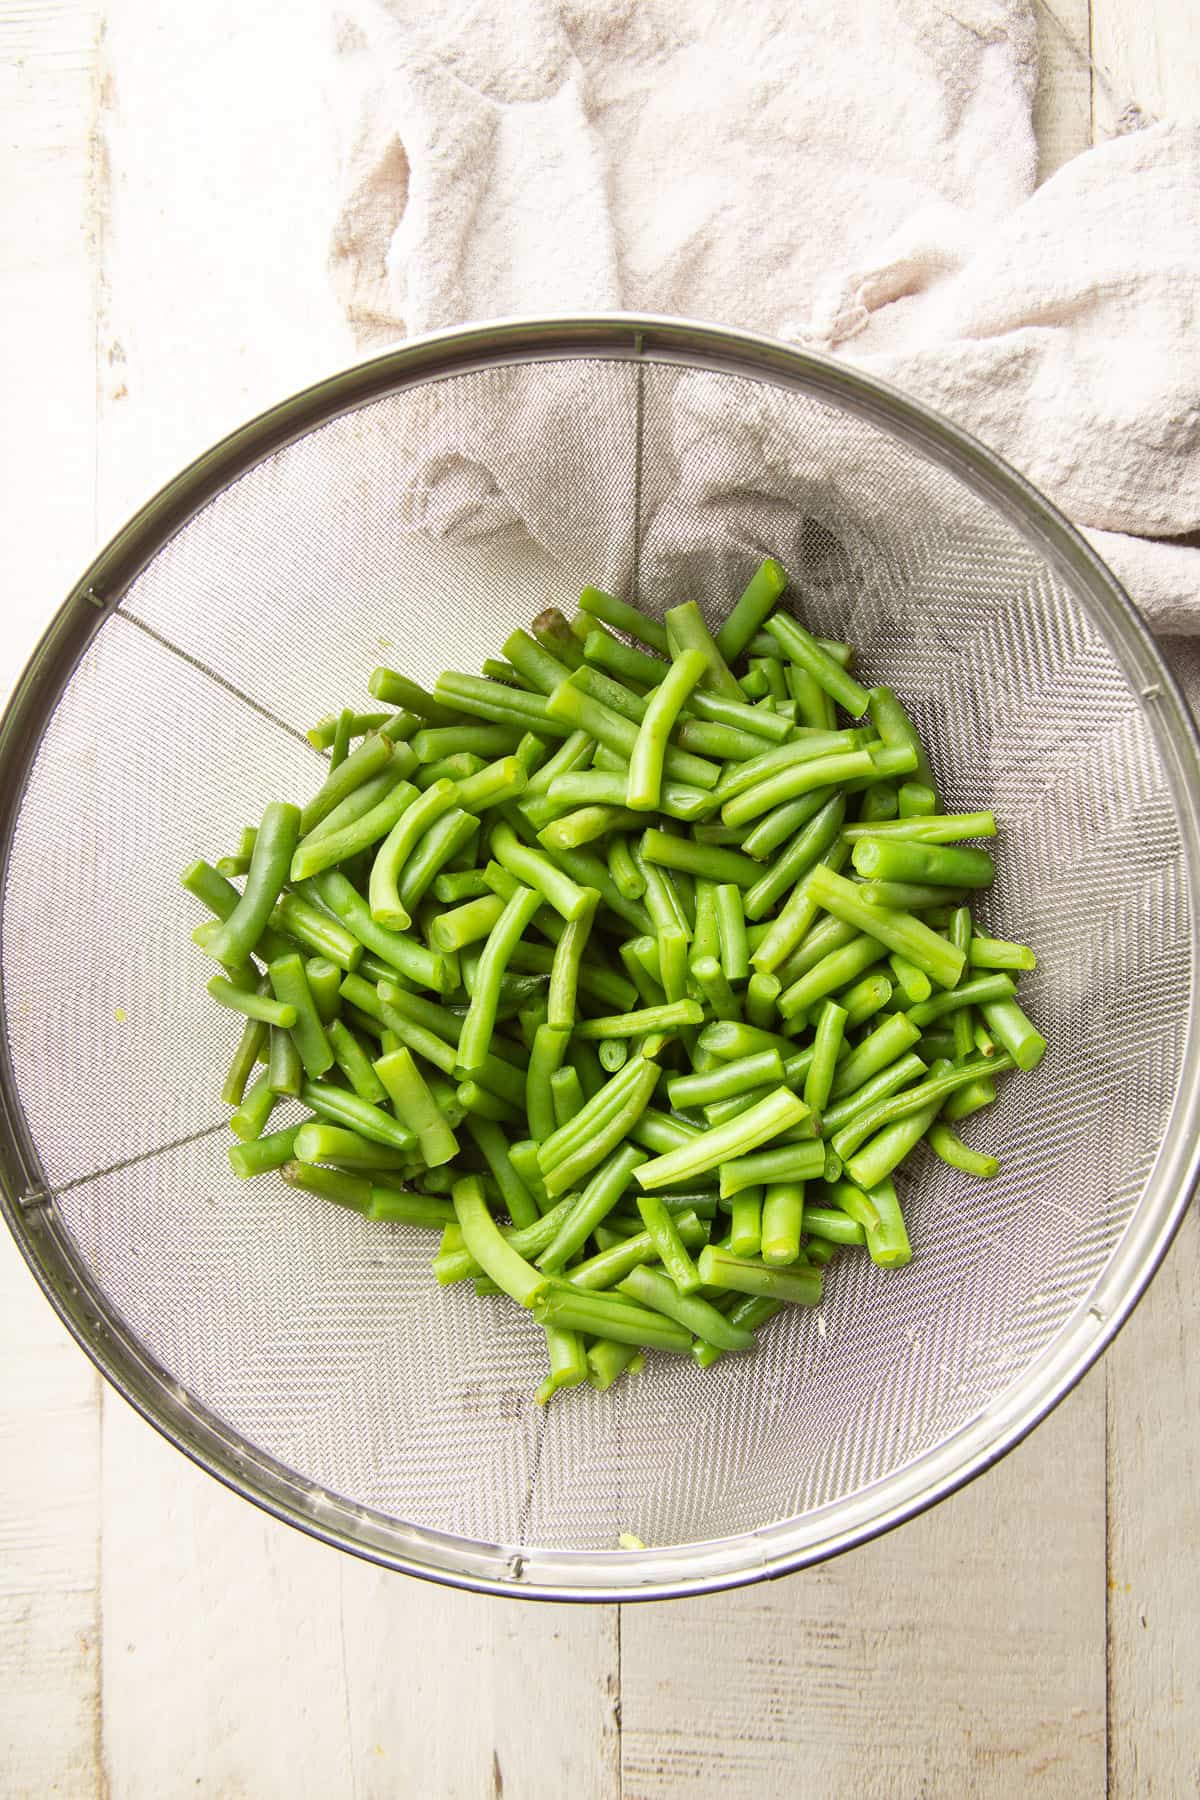 Cooked green beans in a colander.